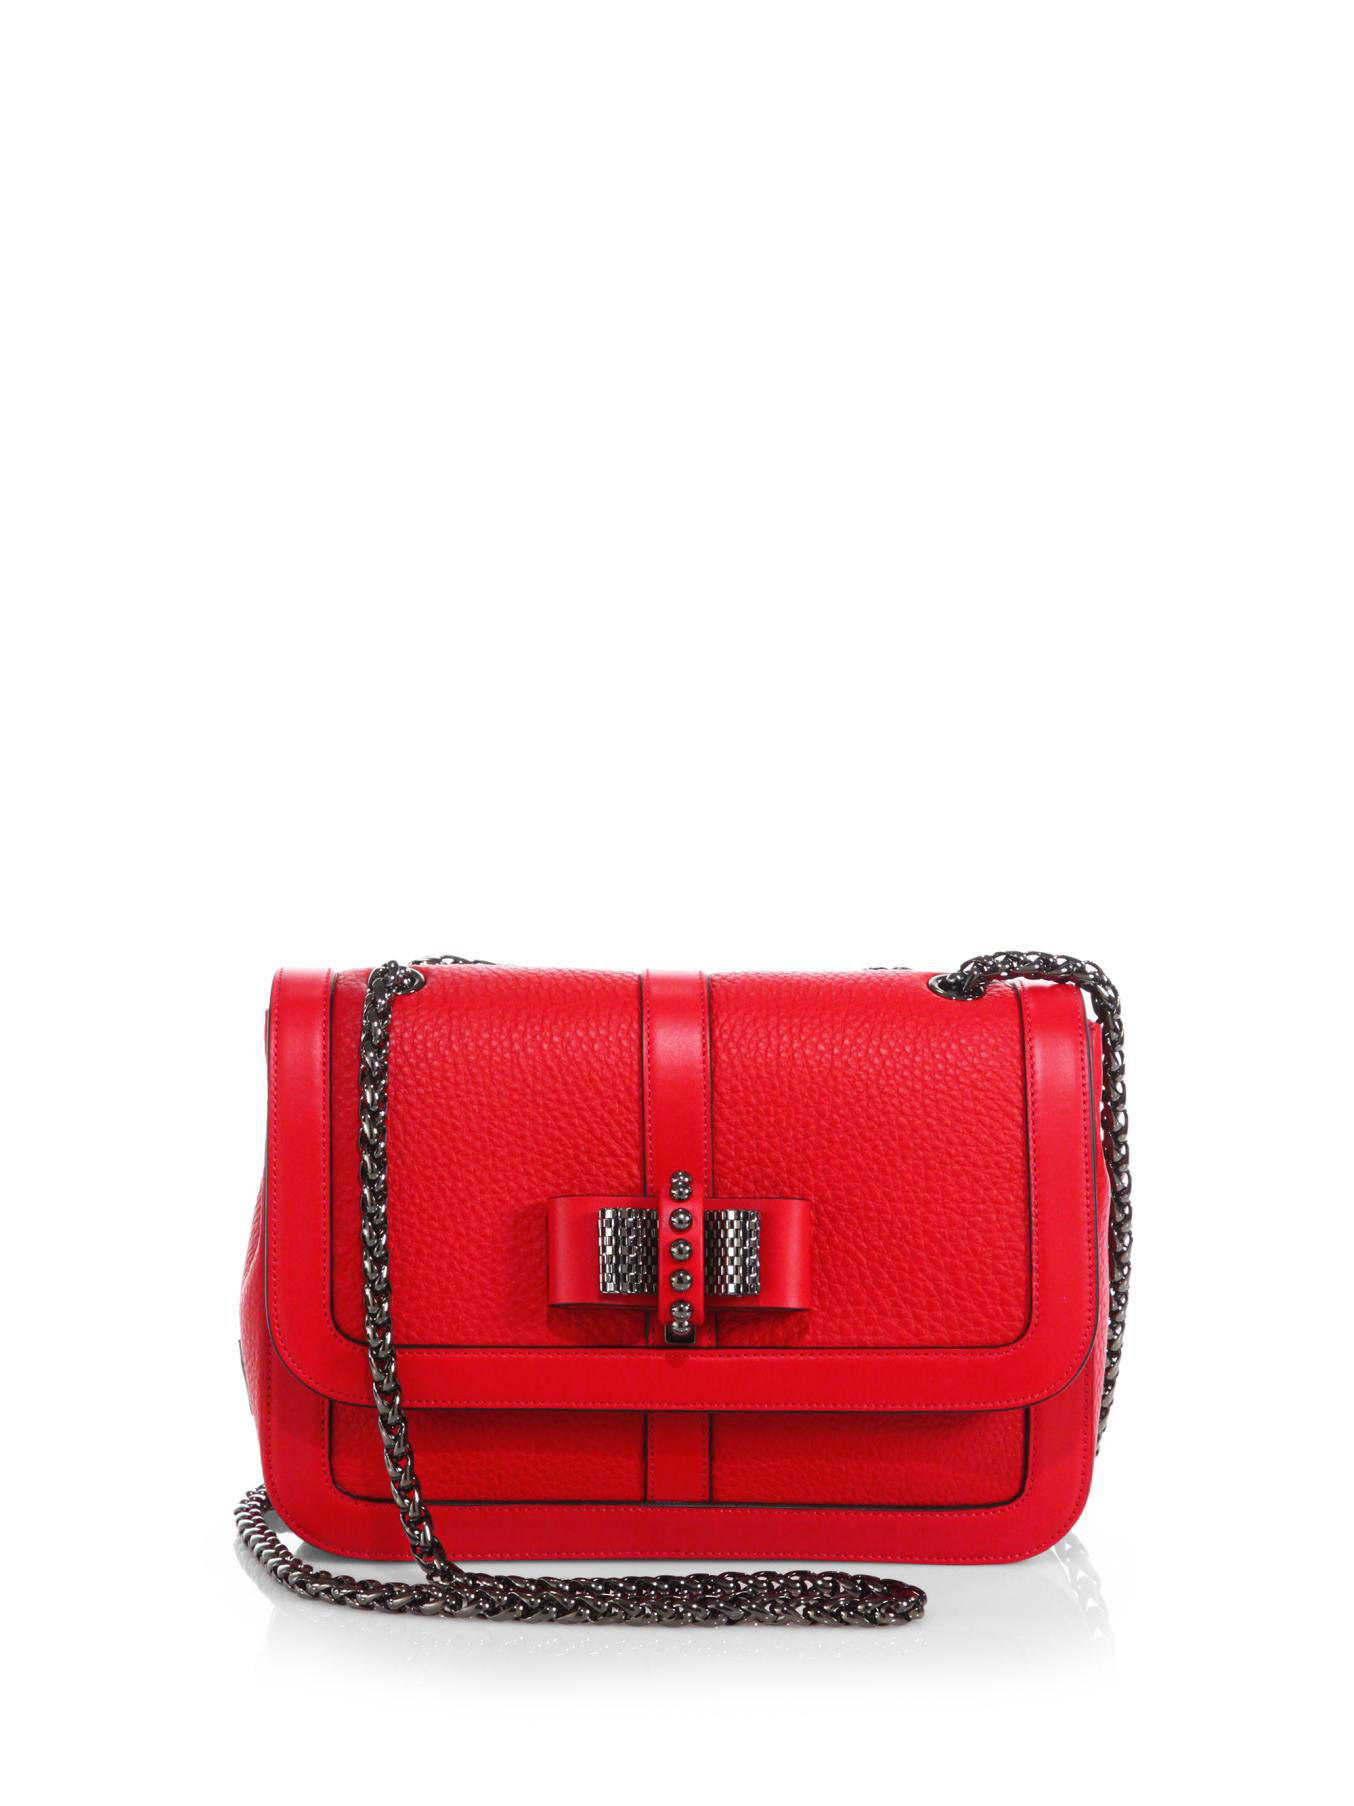 Lyst - Christian Louboutin Sweet Charity Bow-detail Leather Flap Bag in Red